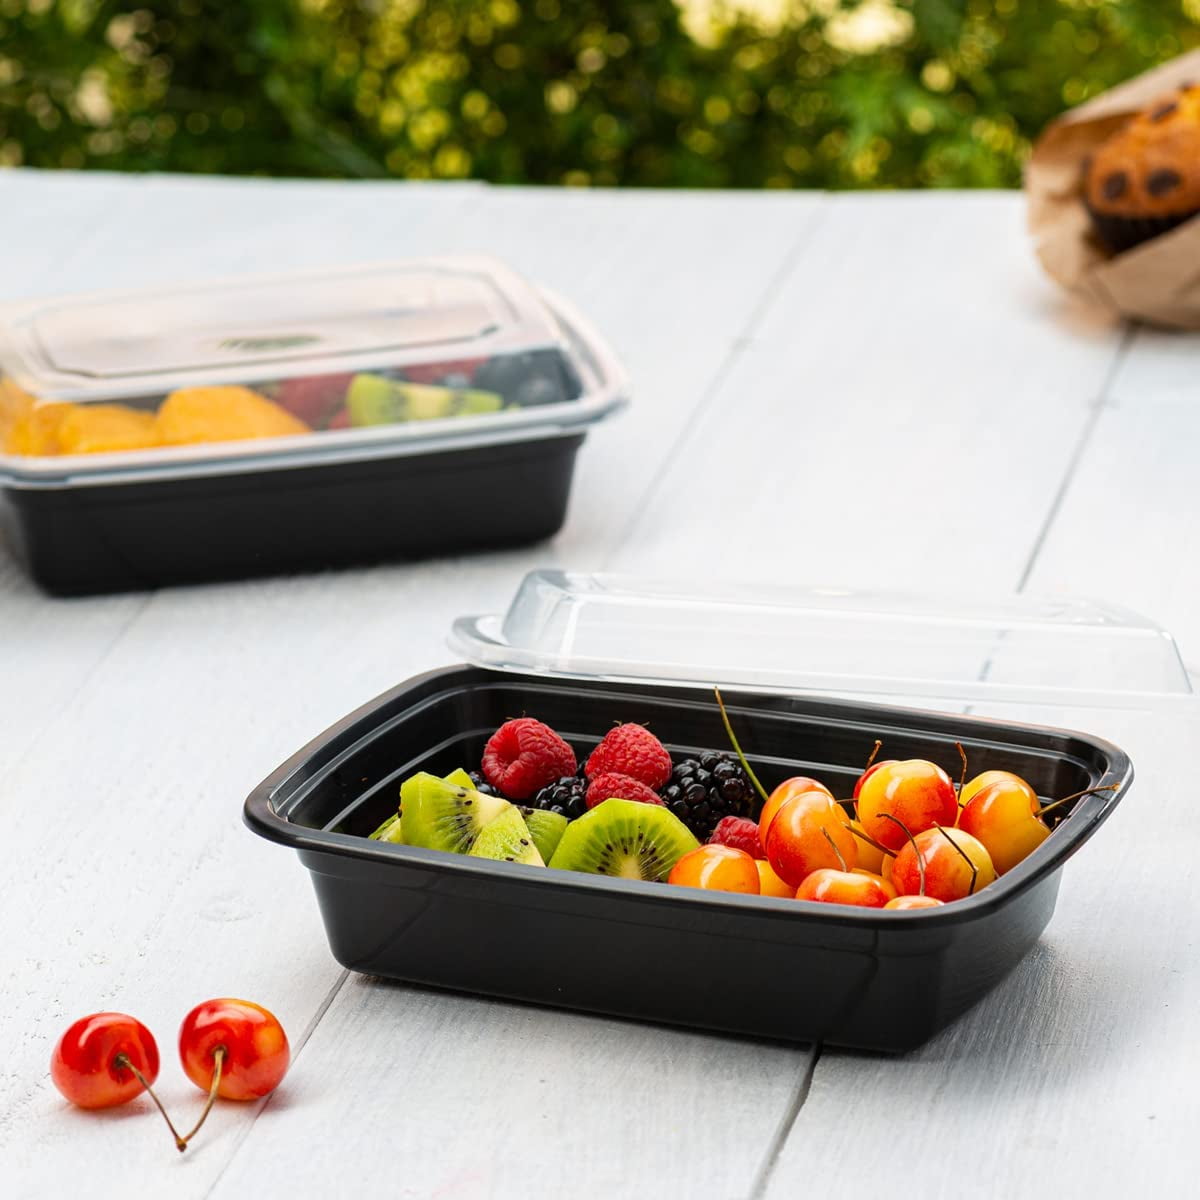 IUMÉ Reusable Food Prep Containers, 50-Pack 24 OZ Plastic Food Containers  with Lids For Meal Food Prepping - Durable BPA Free Food Storage Containers